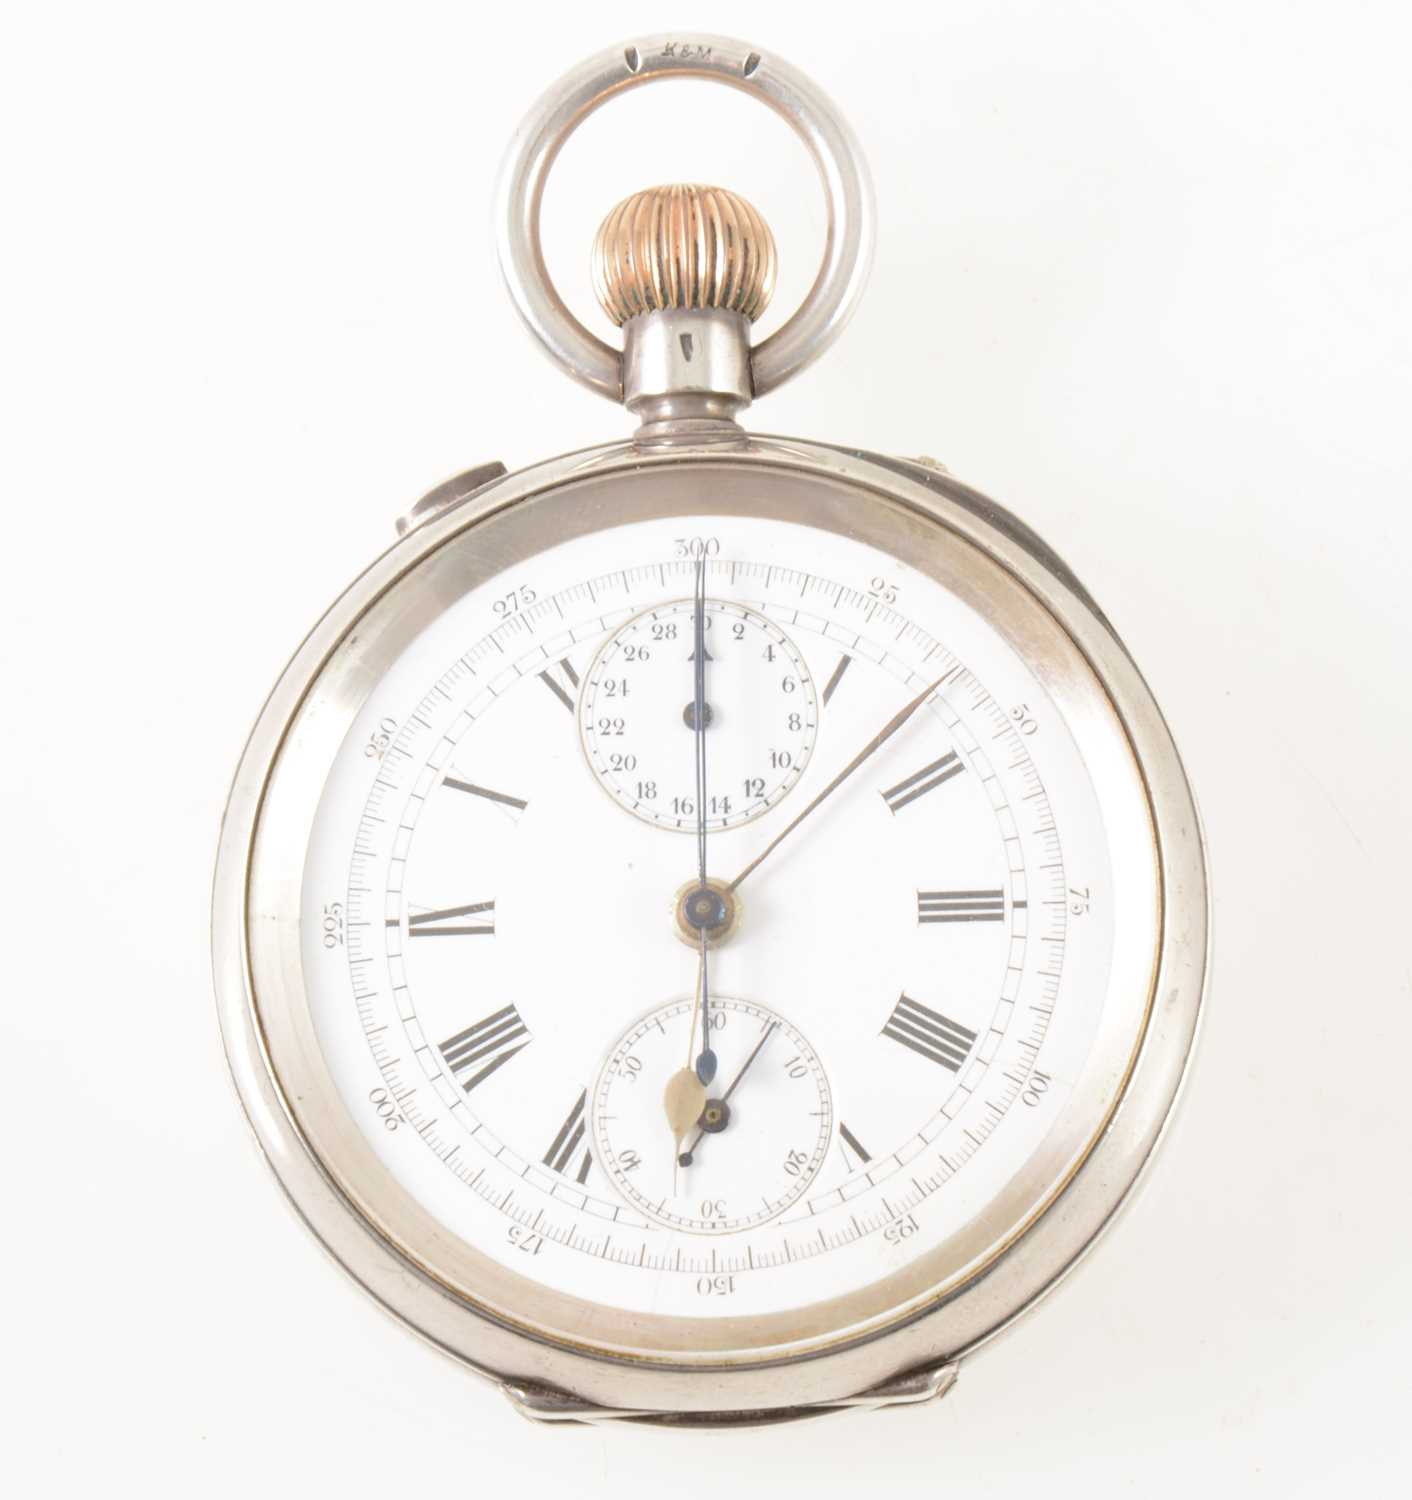 Lot 205 - A white metal open face chronograph pocket watch.